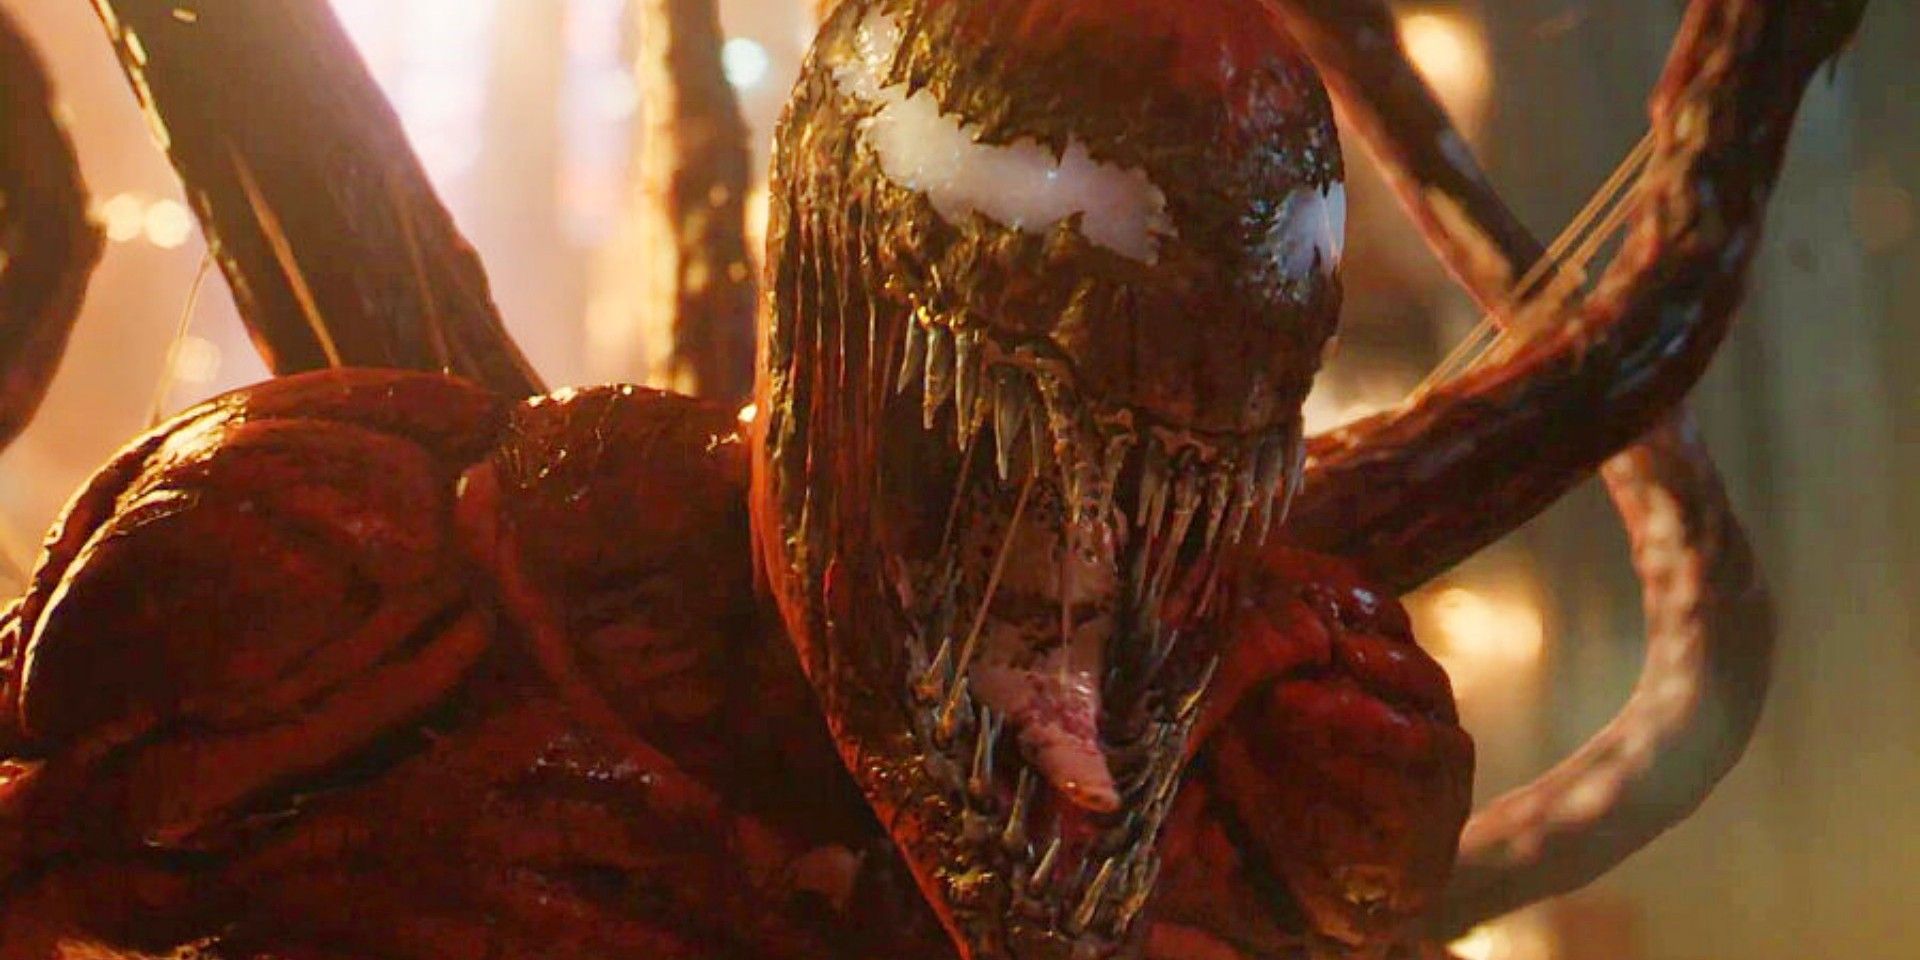 Venom Let There Be Carnage Which Character Are You Based On Your Zodiac Sign